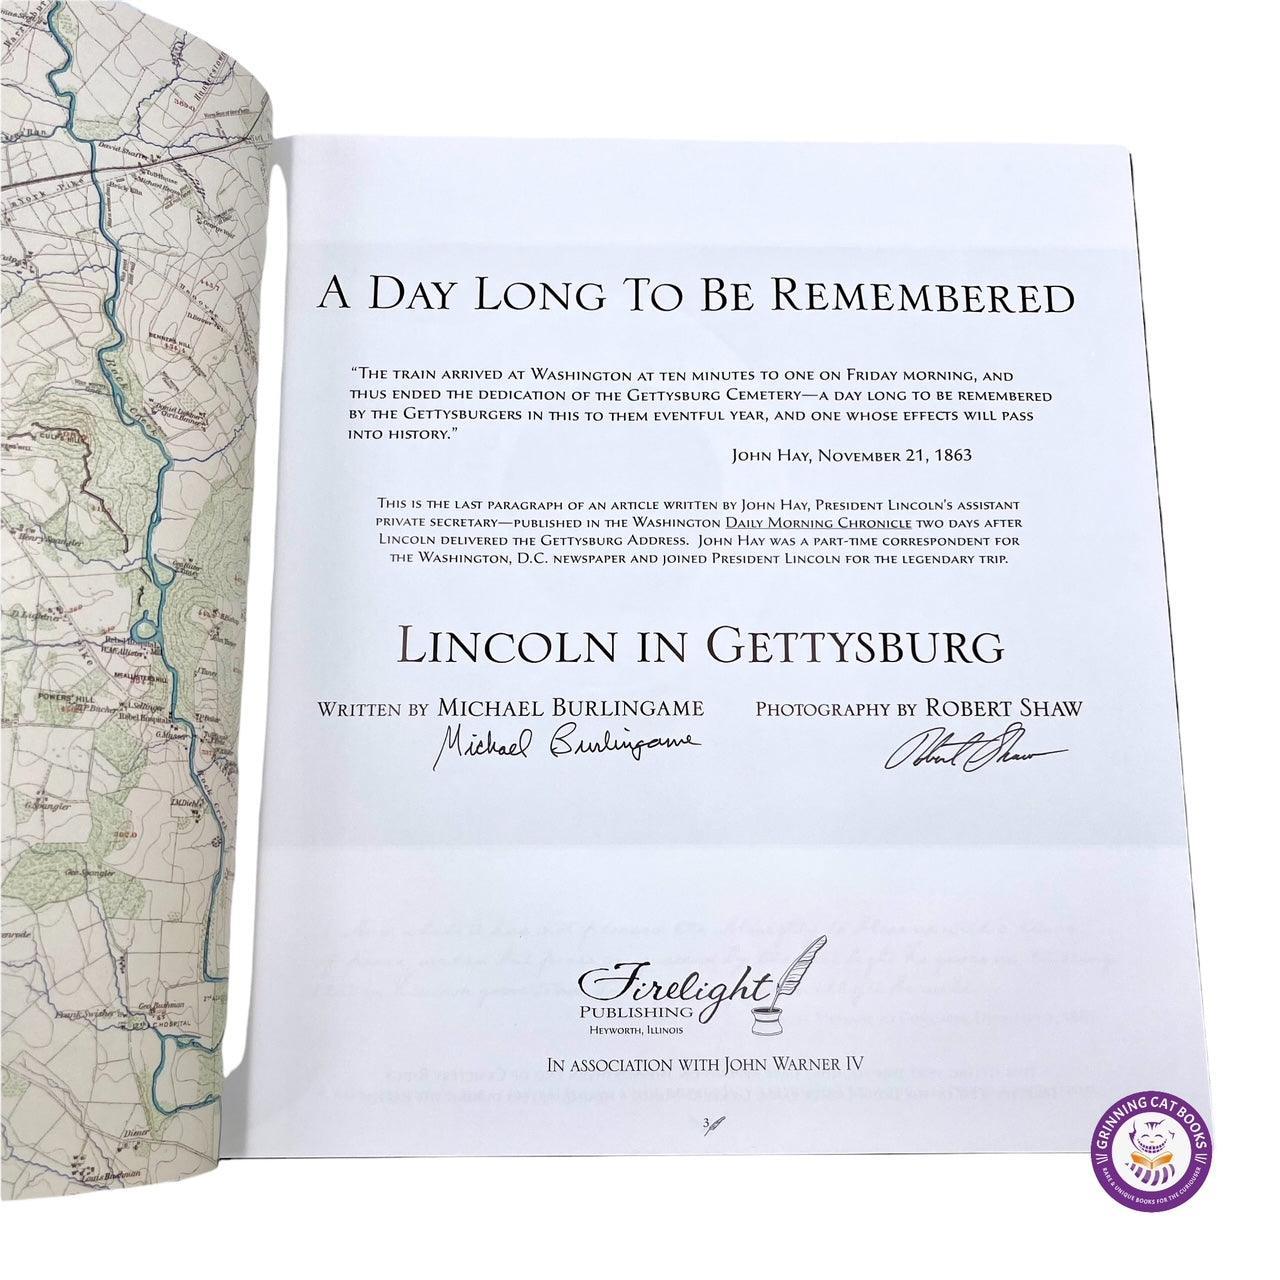 A Day Long to be Remembered: Lincoln at Gettysburg (signed) - Grinning Cat Books - AMERICANA - AMERICAN MILITARY, CIVIL WAR, LINCOLN, MILITARY